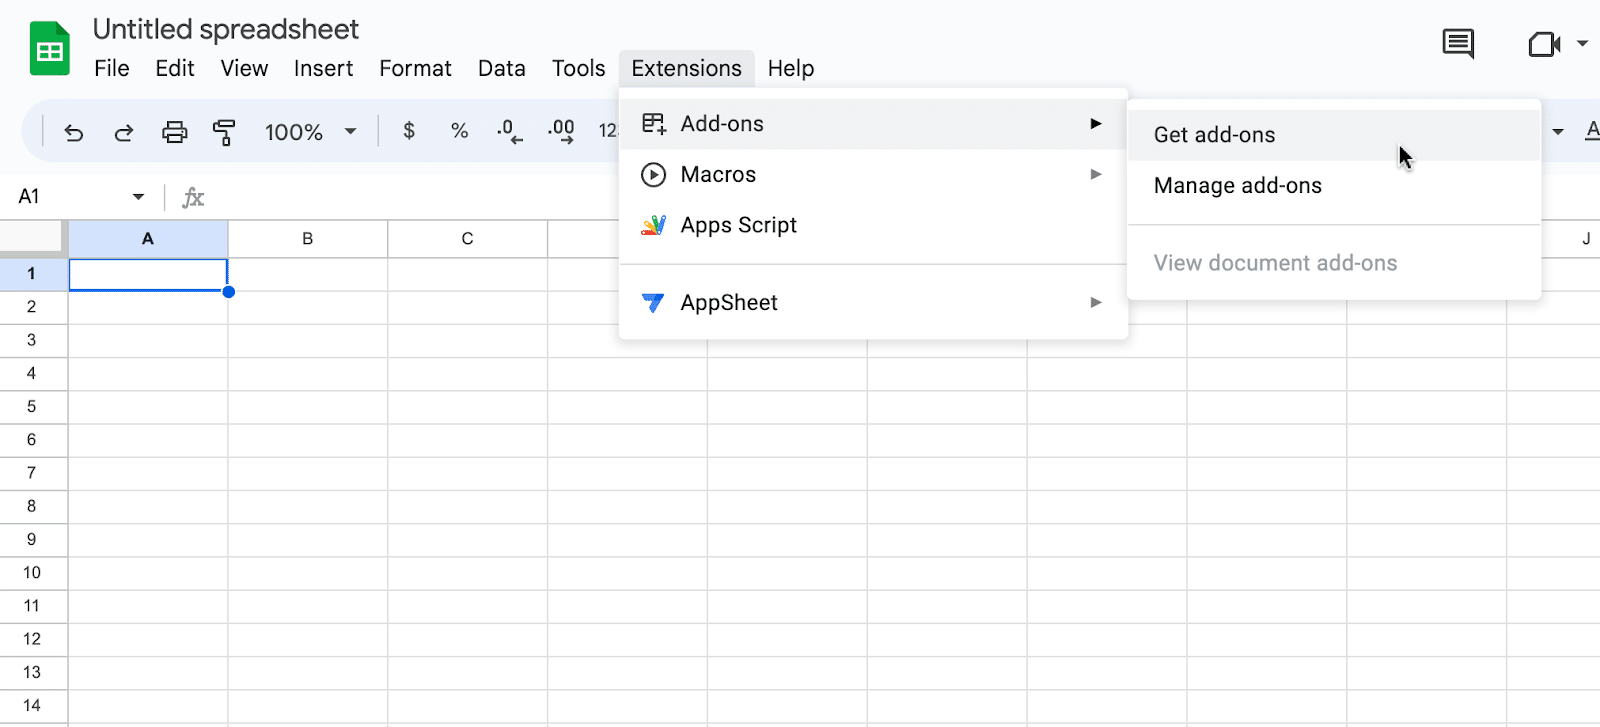 Going to Add-ons > Get add-ons in the Extensions tab of Google Sheets.